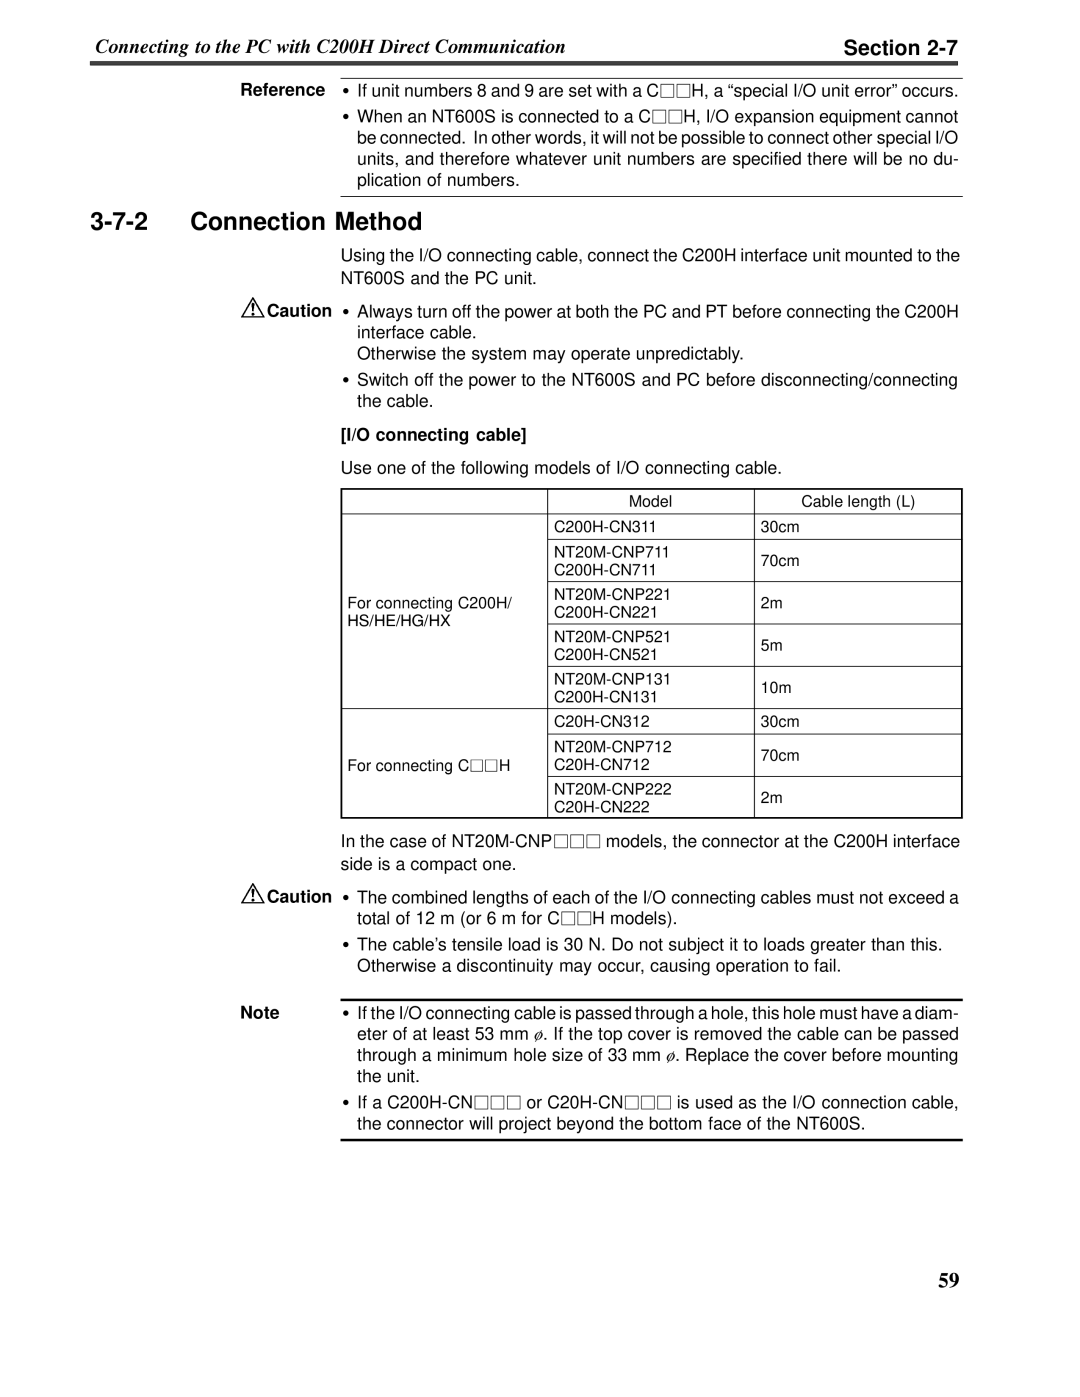 Omron V022-E3-1 operation manual 3-7-2Connection Method, Section, I/O connecting cable 